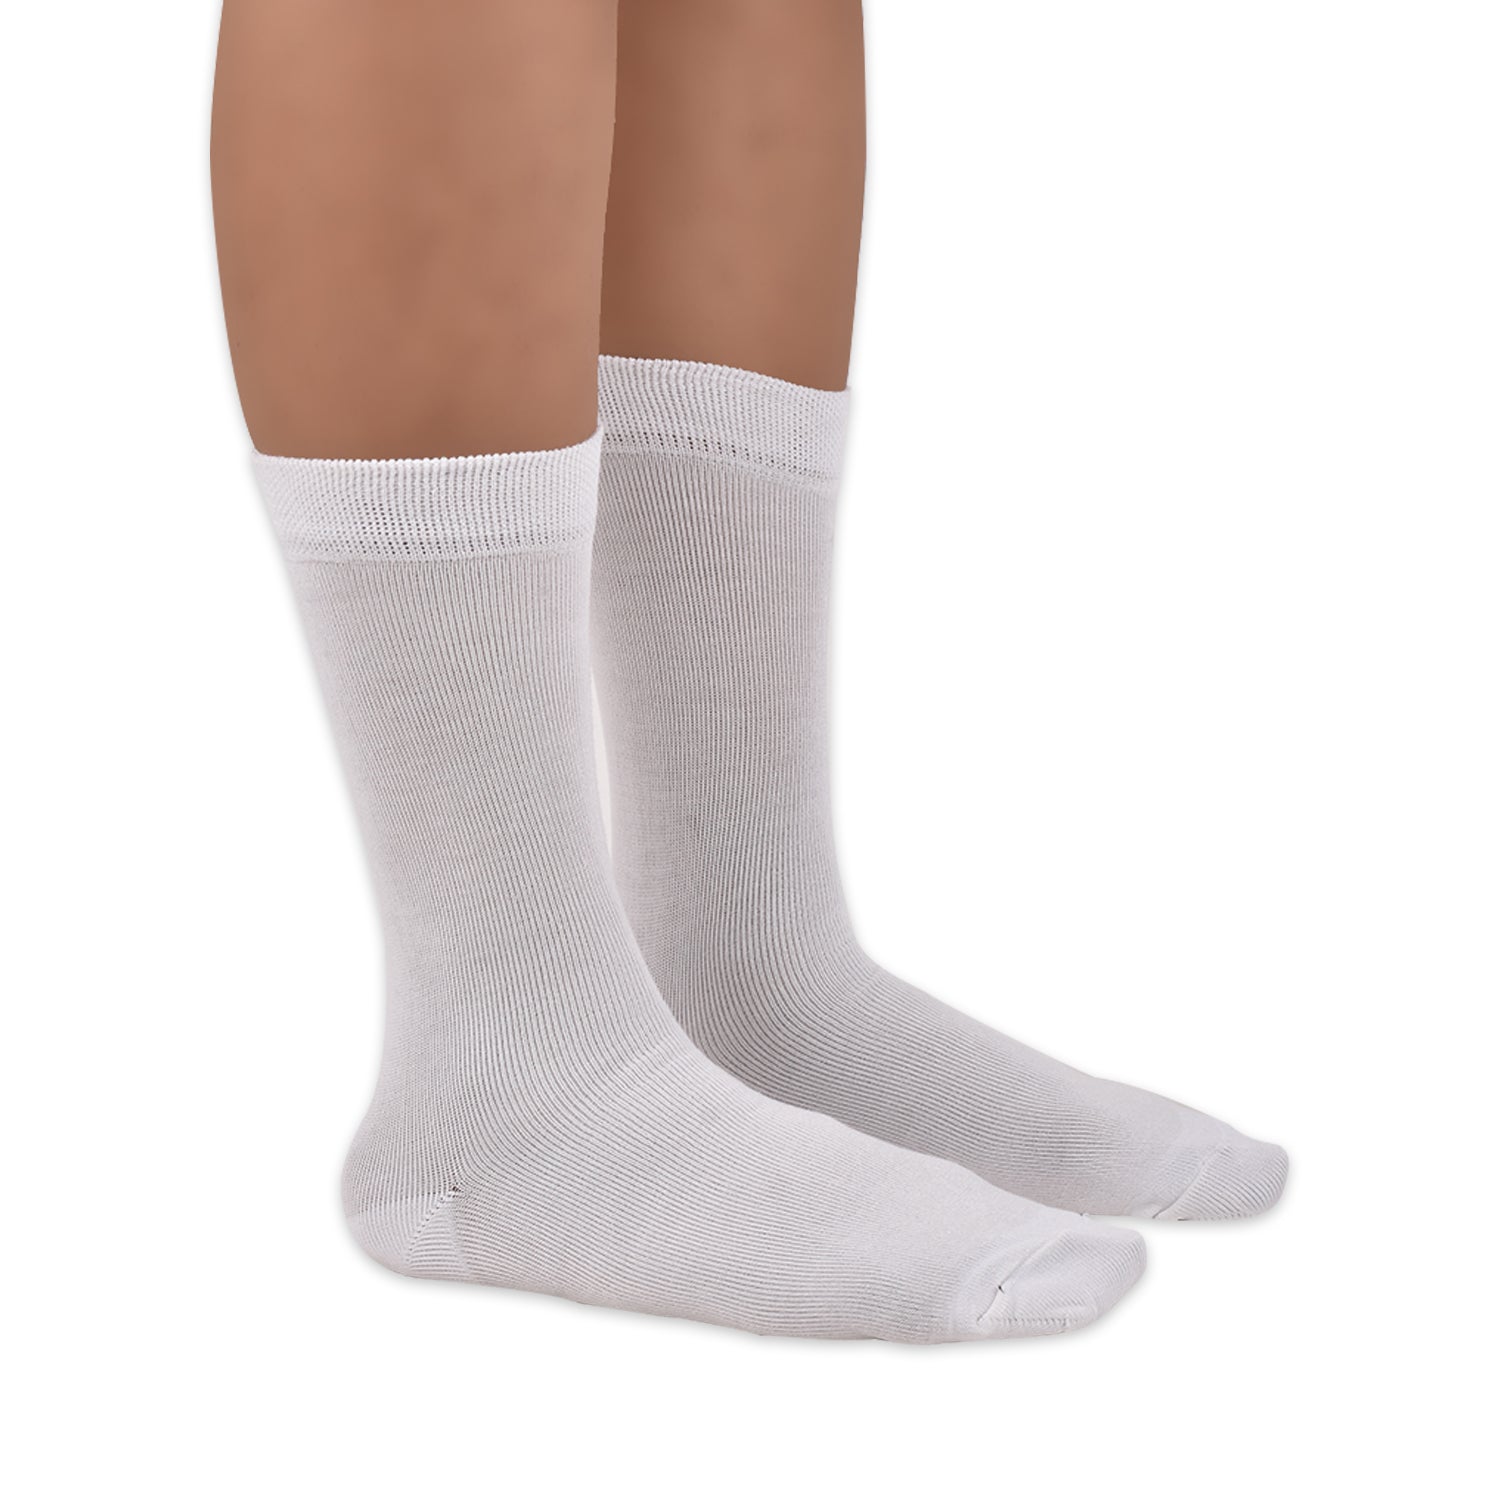 Kids Organic Cotton School Socks - Unisex - Calf length- Pack of 5 (Black and White)- Extra soft and Breathable